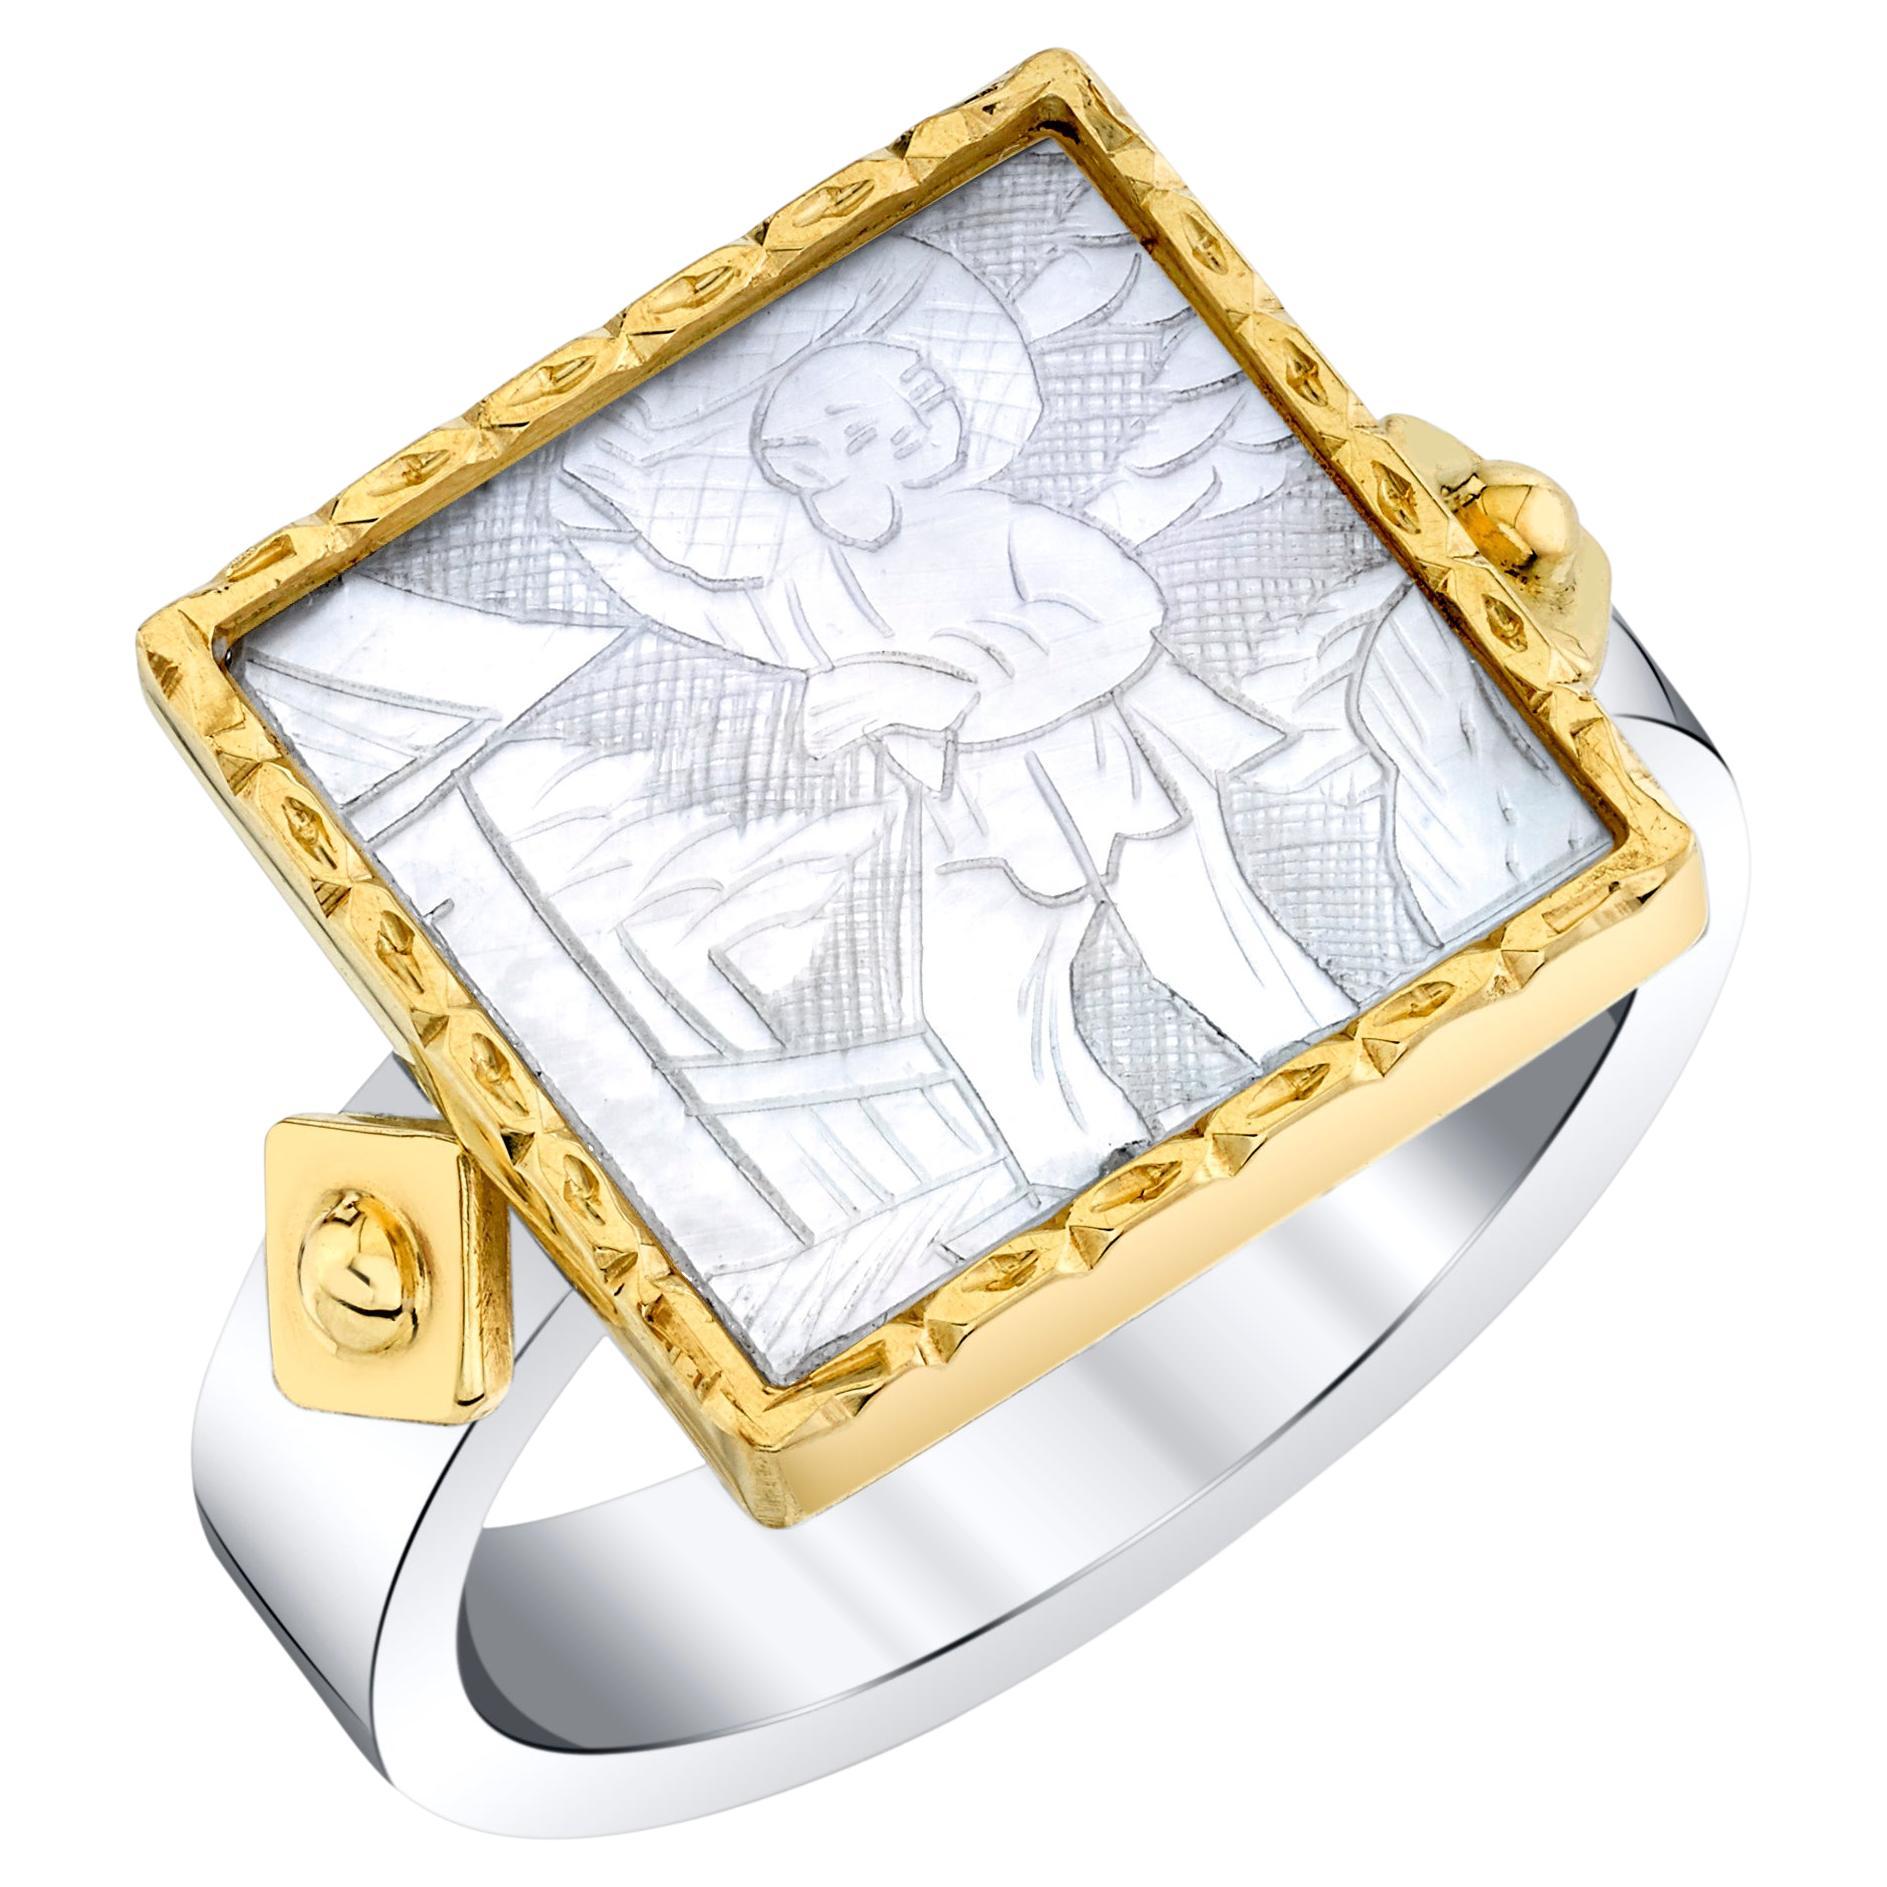 Antique Mother-of-Pearl Gaming Counter Ring in 18k Yellow Gold and Silver 